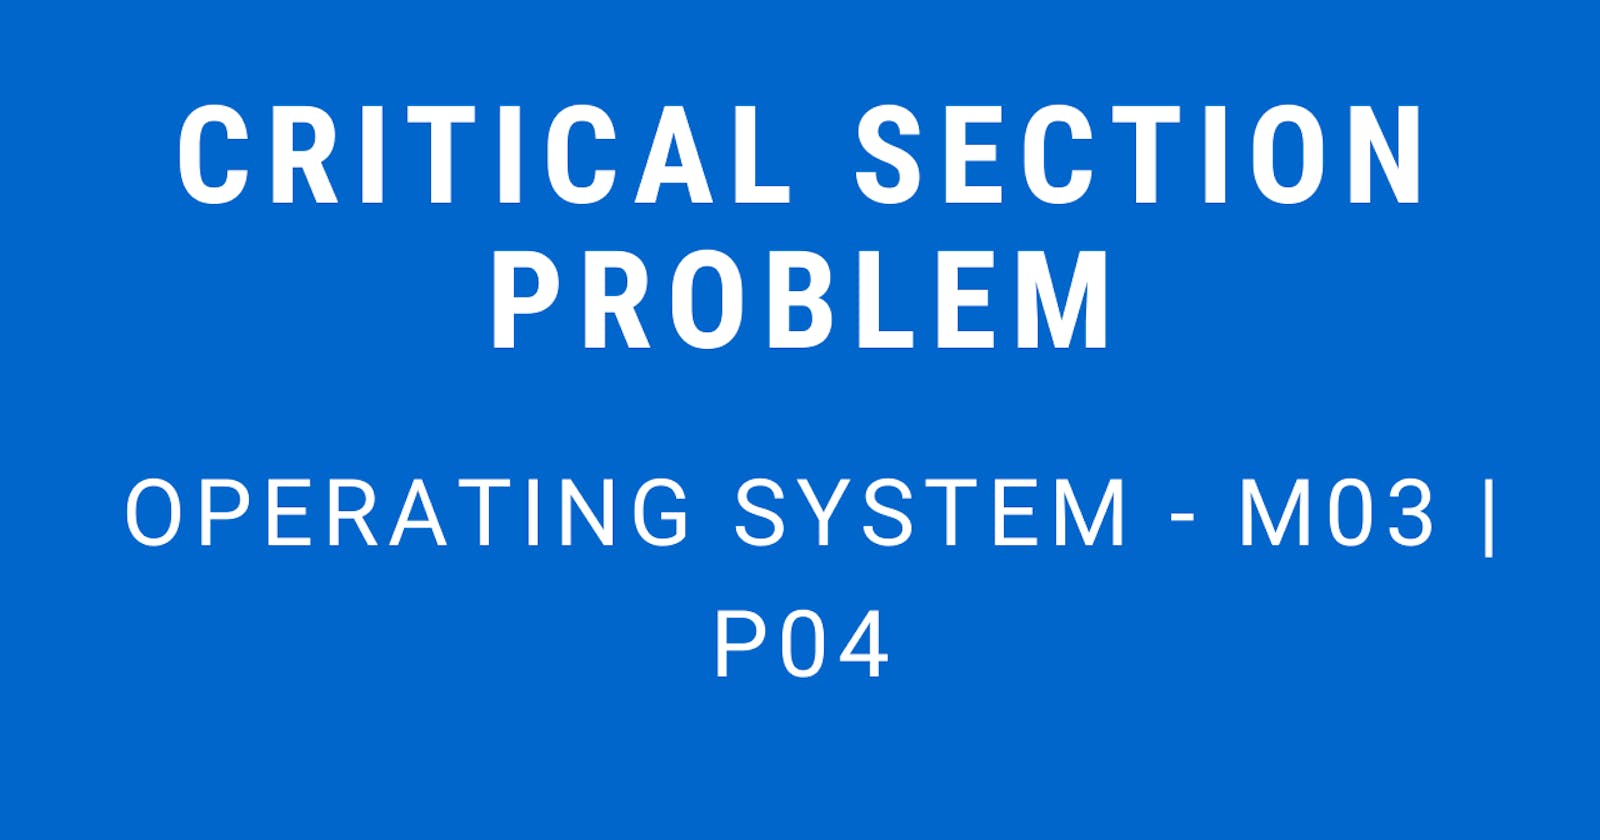 Critical Section Problem | Operating System - M03 P04